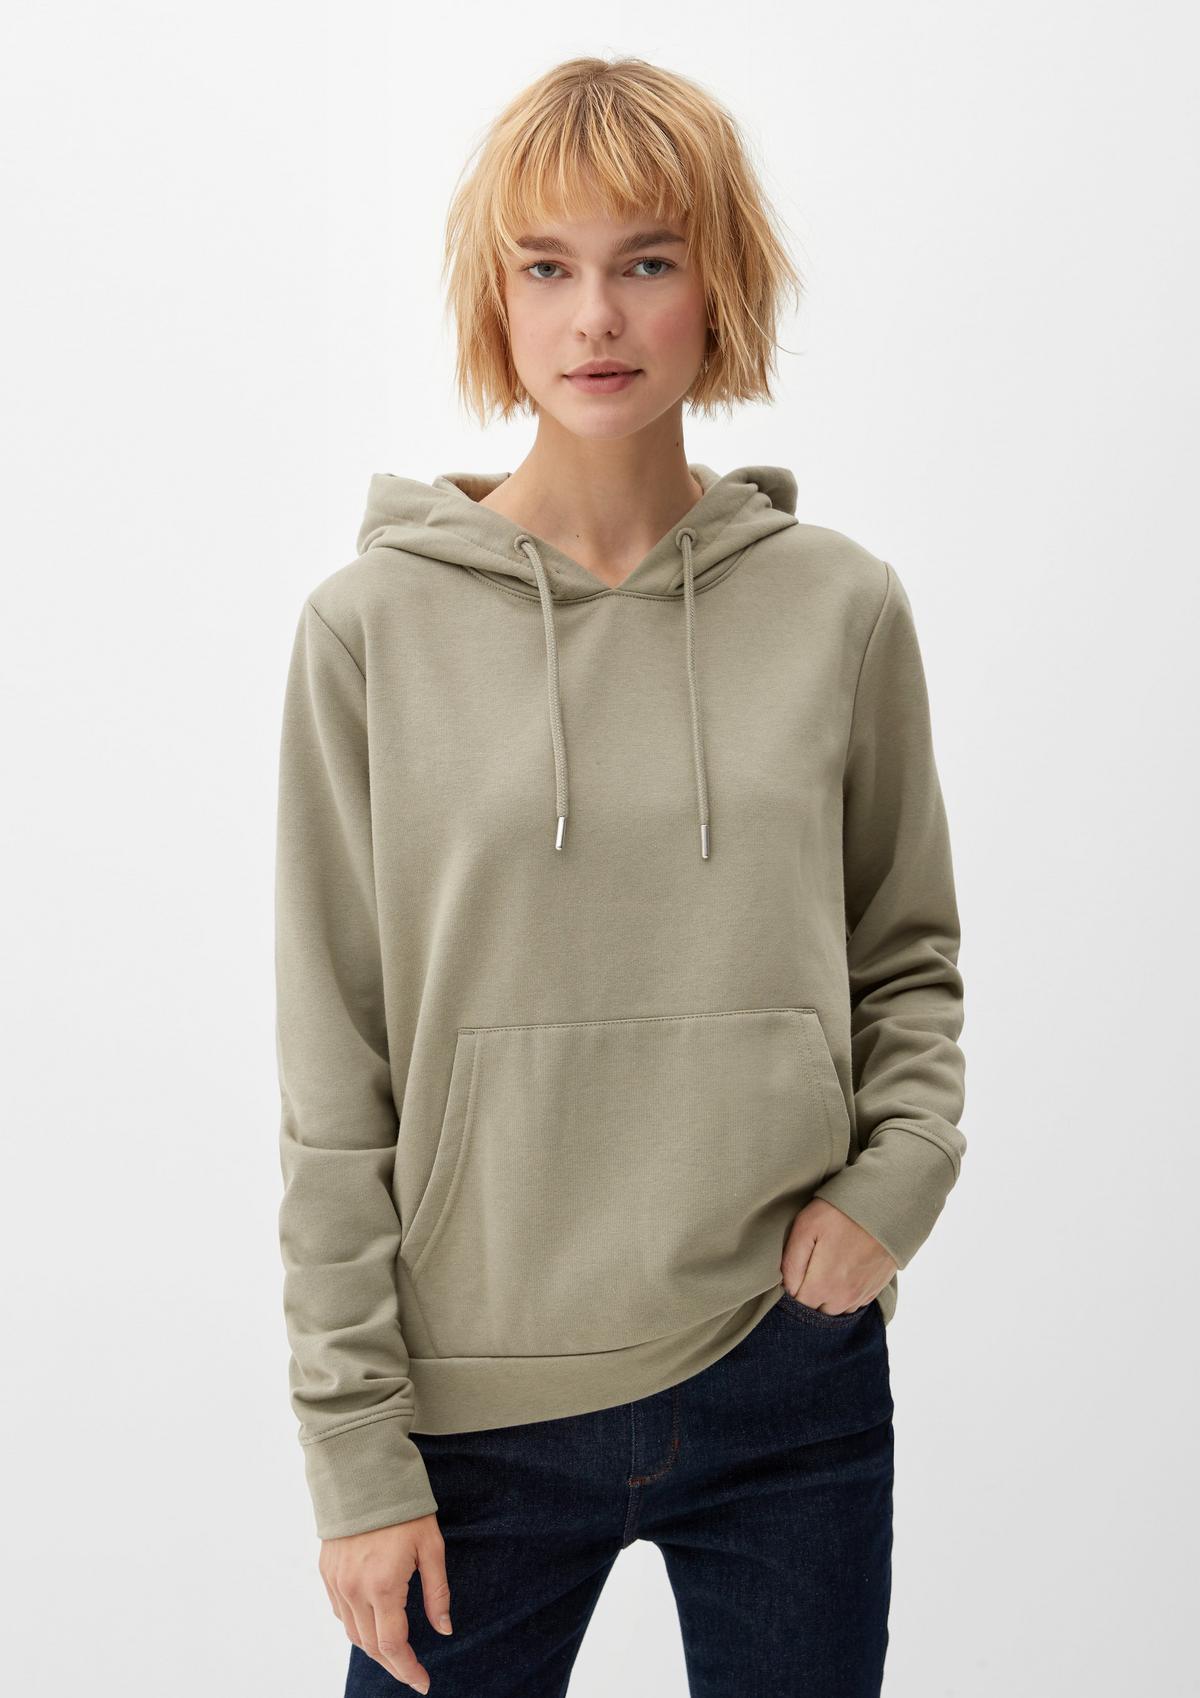 s.Oliver Hooded sweatshirt made of a cotton blend